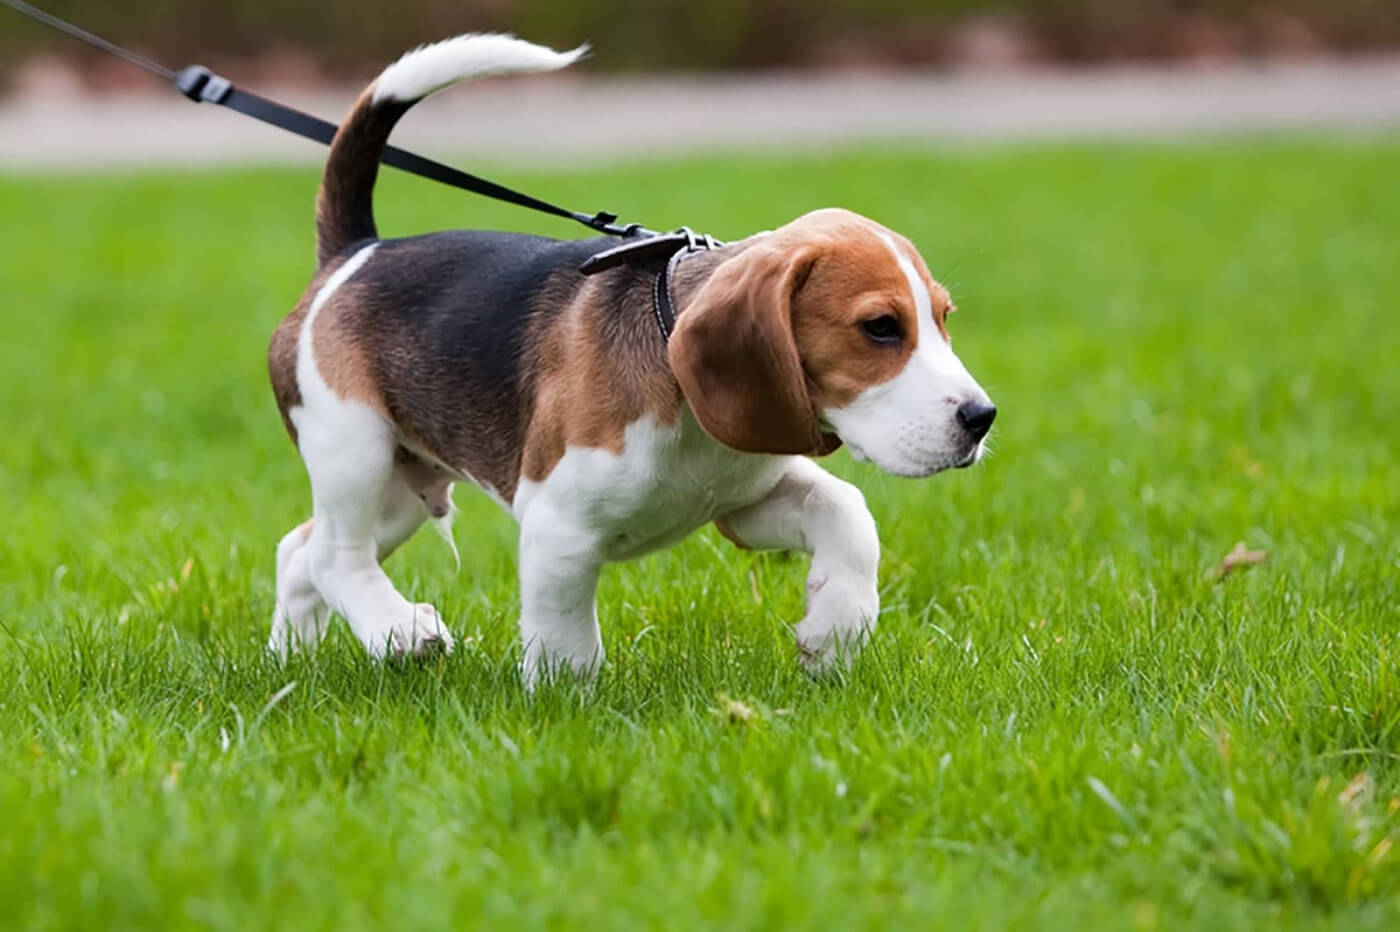 Puppy training - How to train your puppy properly